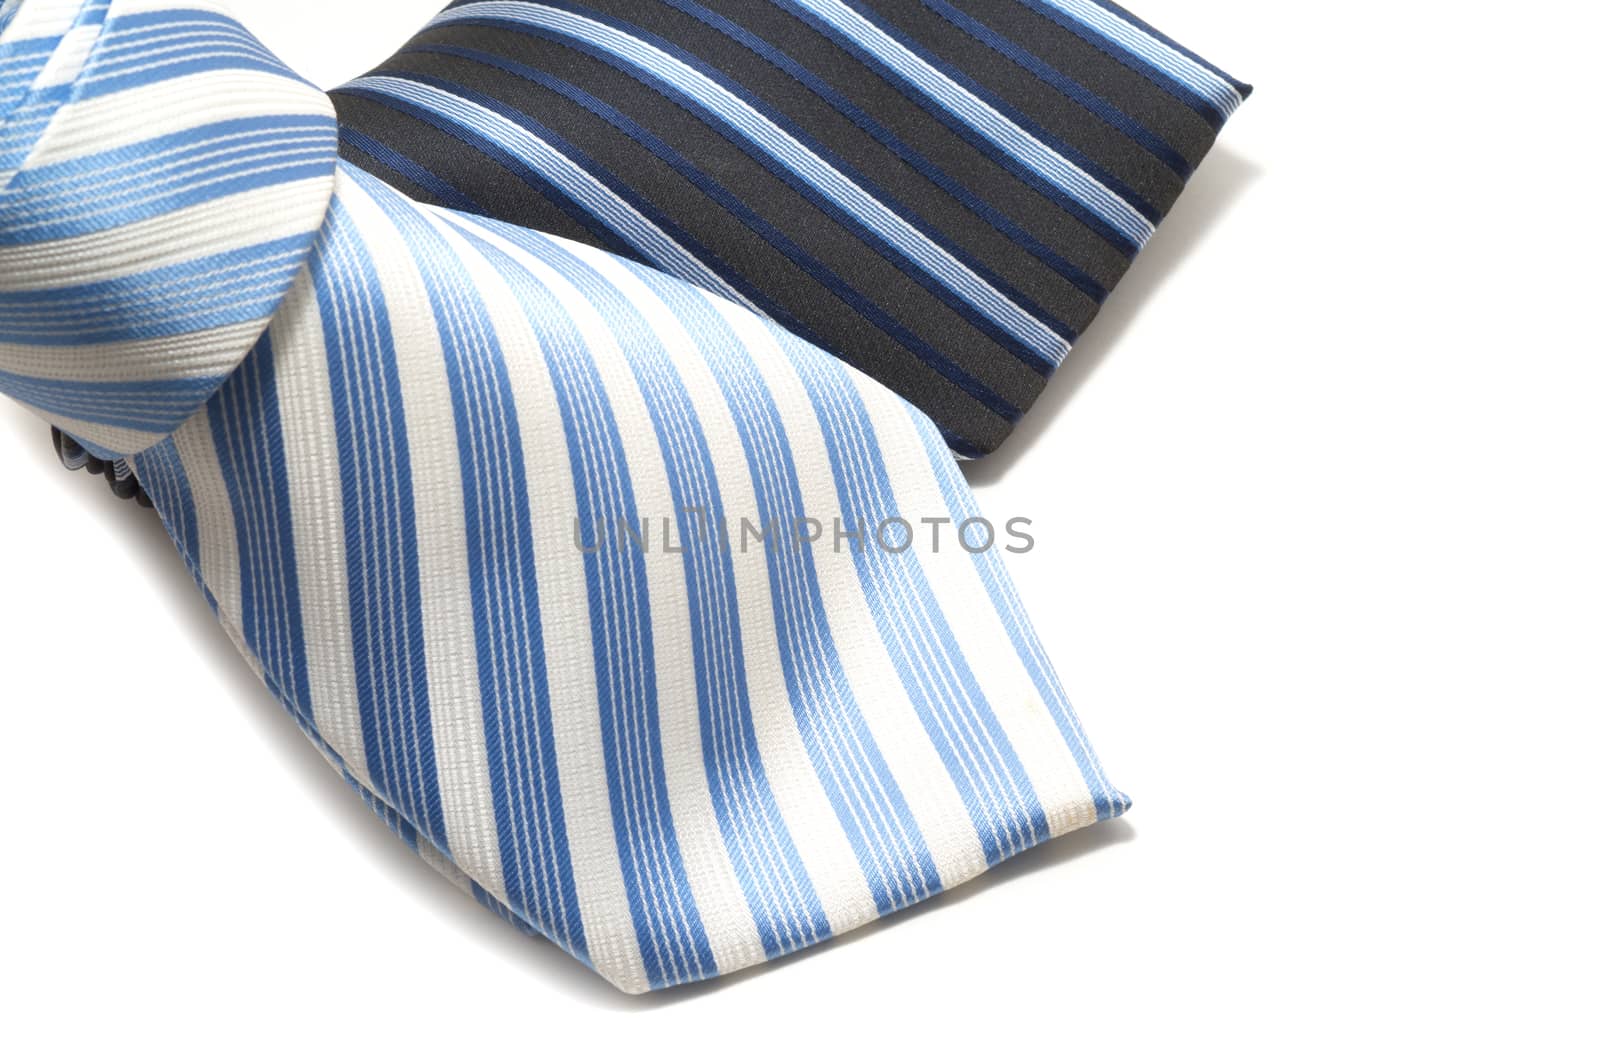 Two pin stripe ties on white background by daoleduc